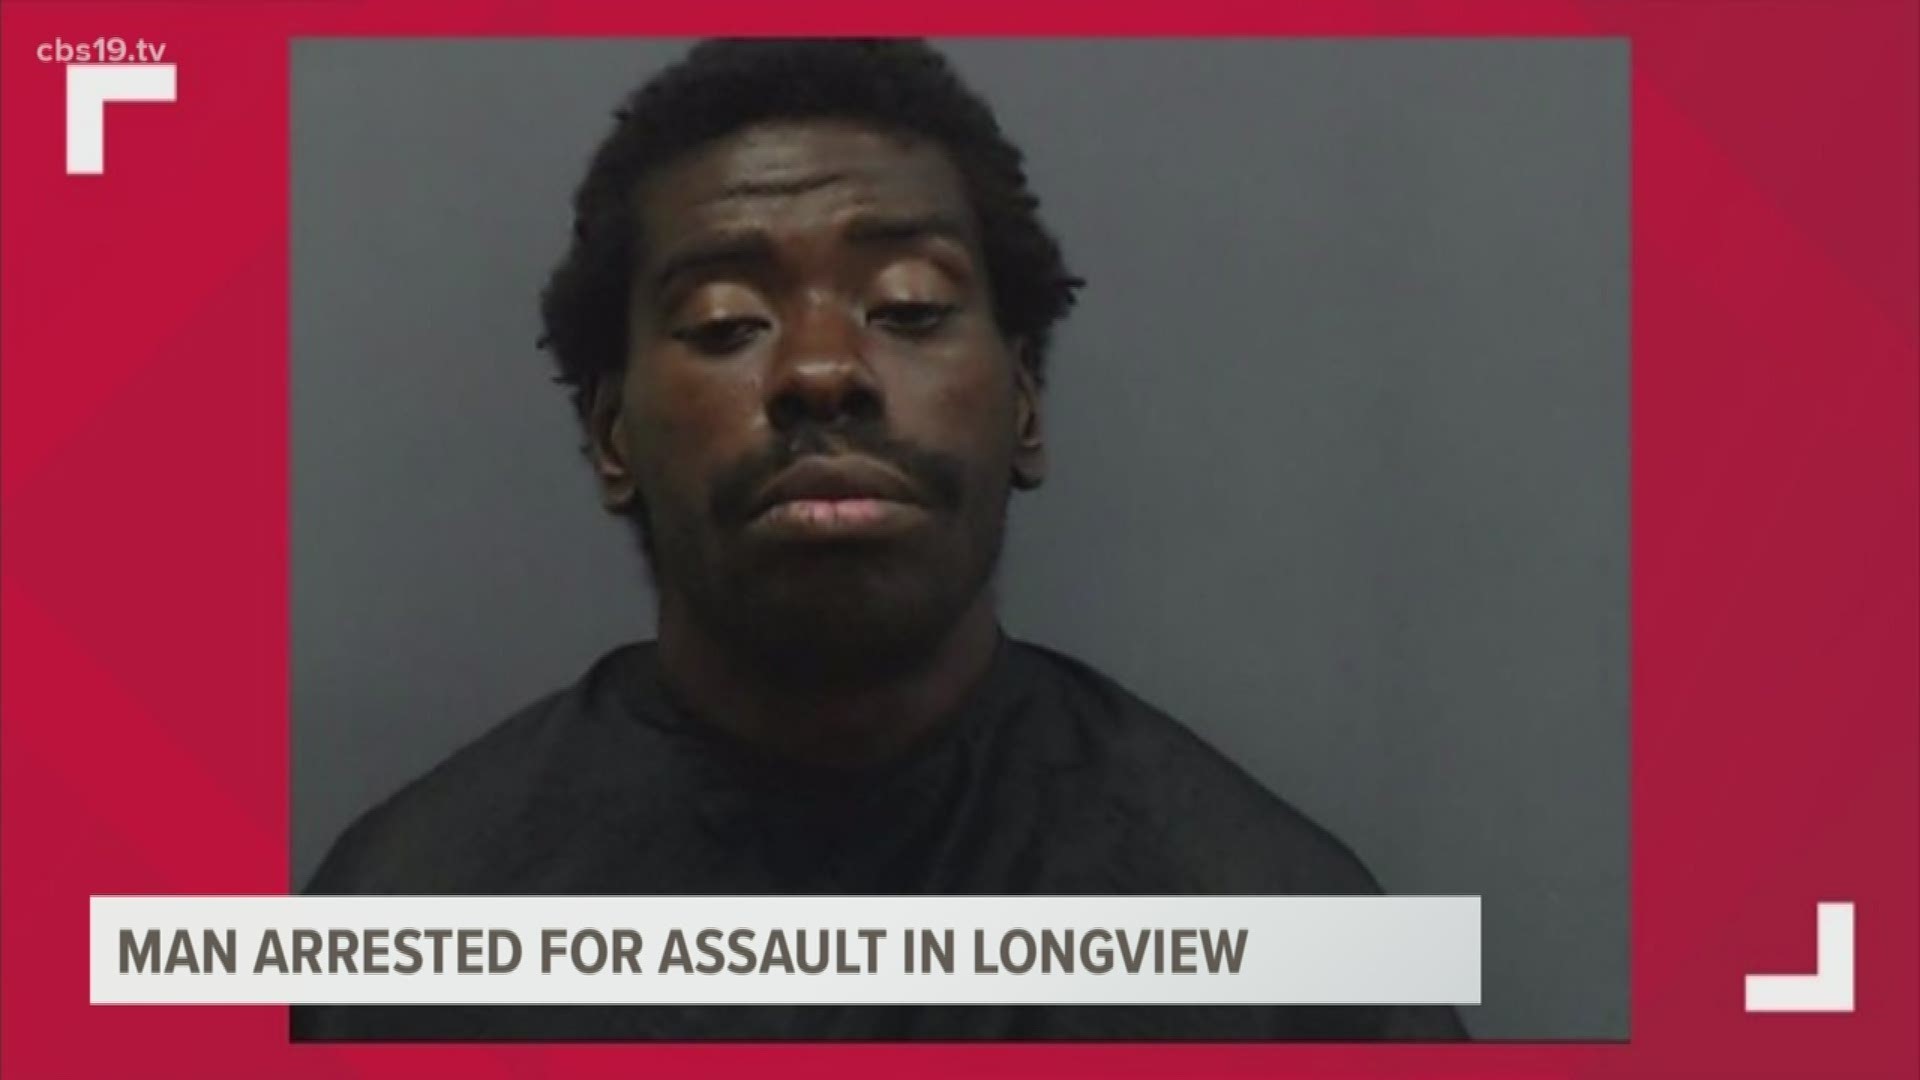 Man Arrested For Aggravated Assault With A Deadly Weapon In Longview Cbs19tv 3023